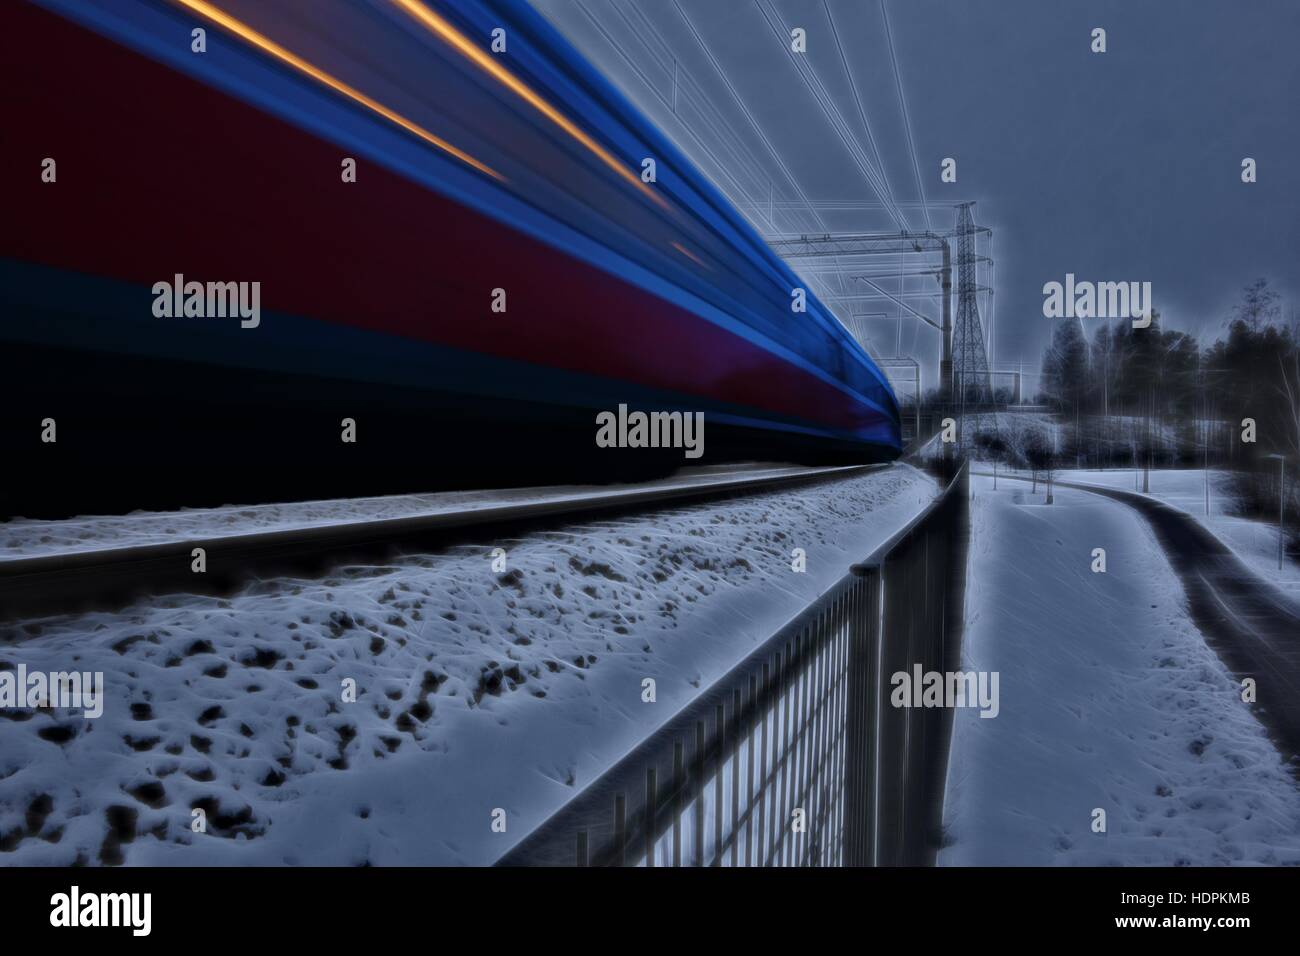 Fast moving train in winter evening setting in Helsinki, Finland with artistic post-processing of long exposure capture Stock Photo